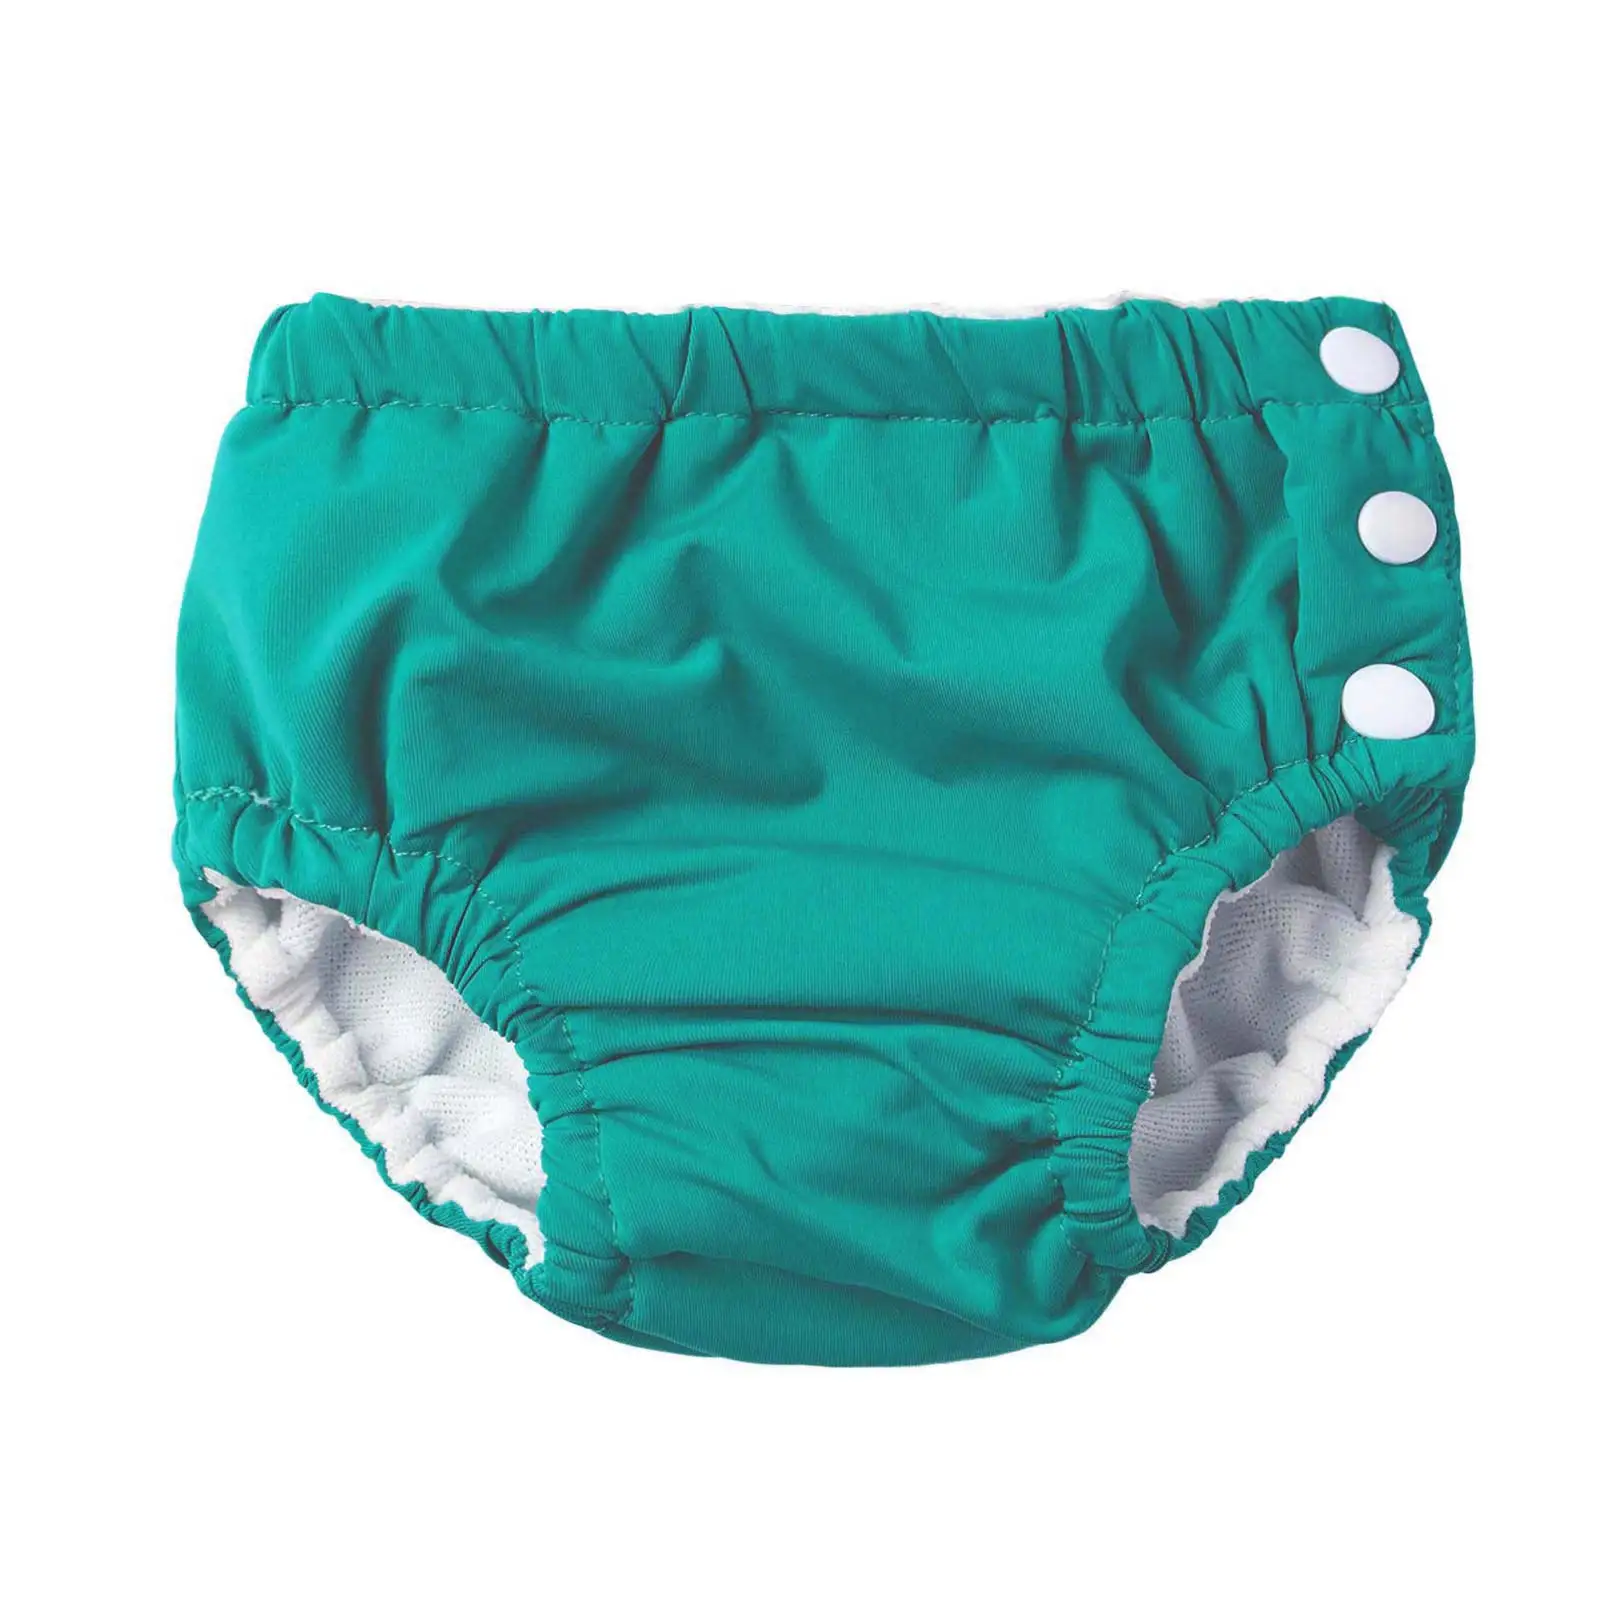 Infant New Baby Girls Boys Swimming Trunk Reusable Diapers Washable Panties Elastic Waistband Button Closure Shorts Swimwear images - 6